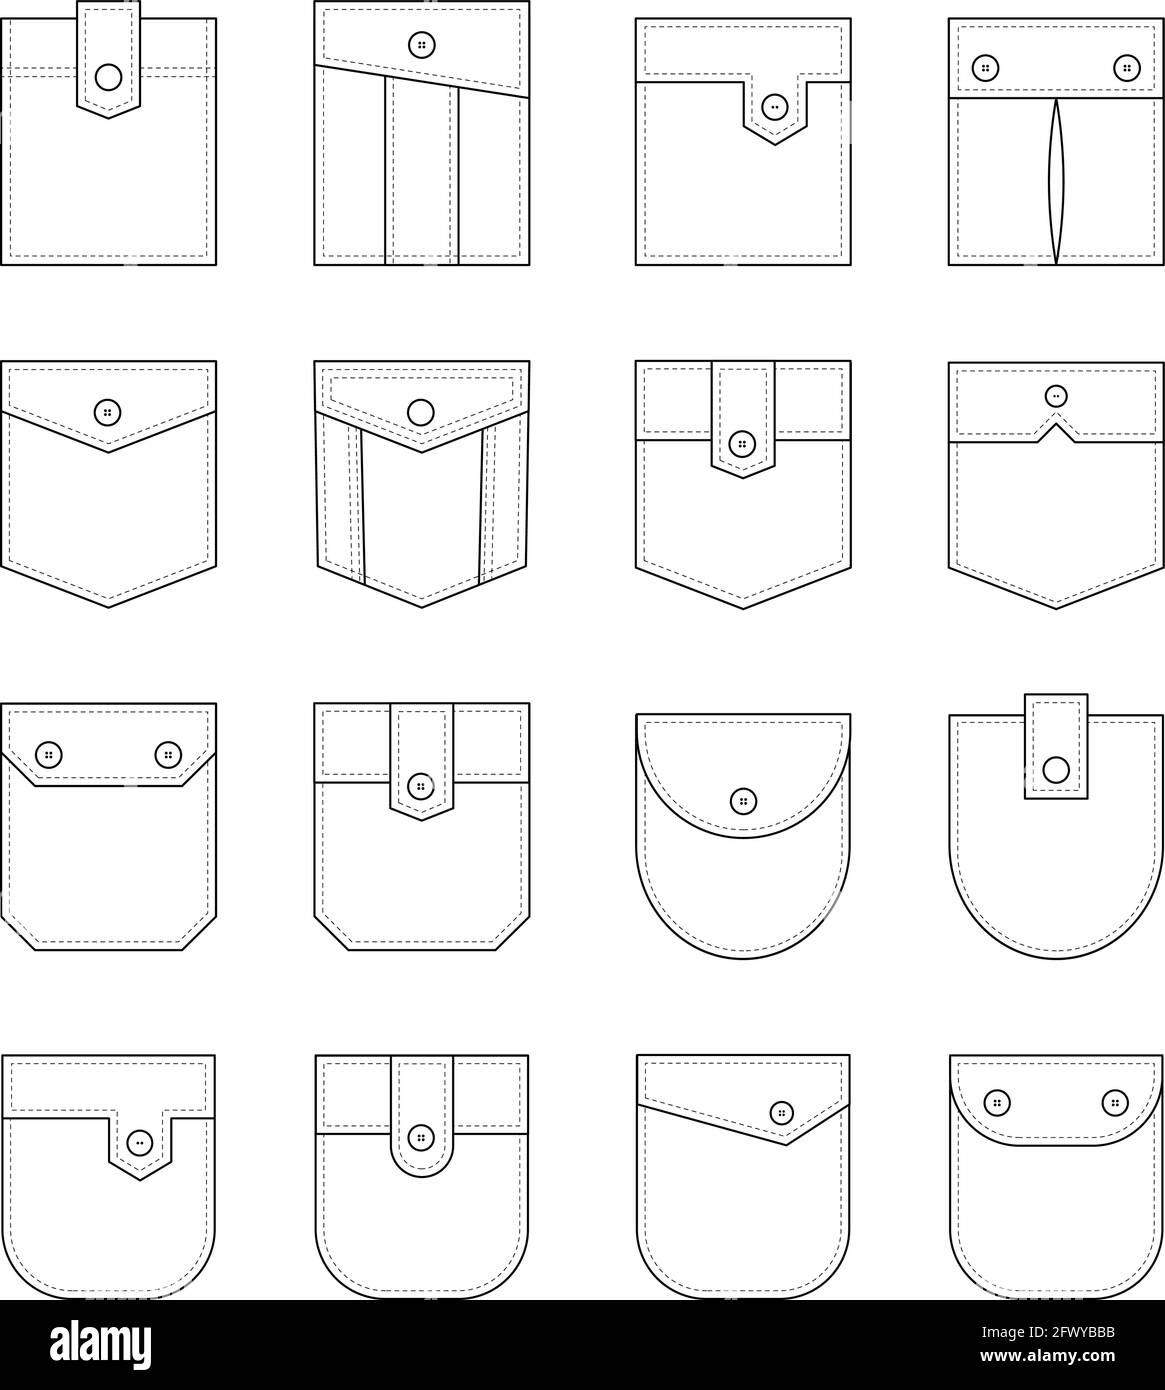 https://c8.alamy.com/comp/2FWYBBB/patch-pocket-set-of-uniform-patch-pockets-shapes-for-clothes-dress-shirt-casual-denim-style-isolated-icons-2FWYBBB.jpg